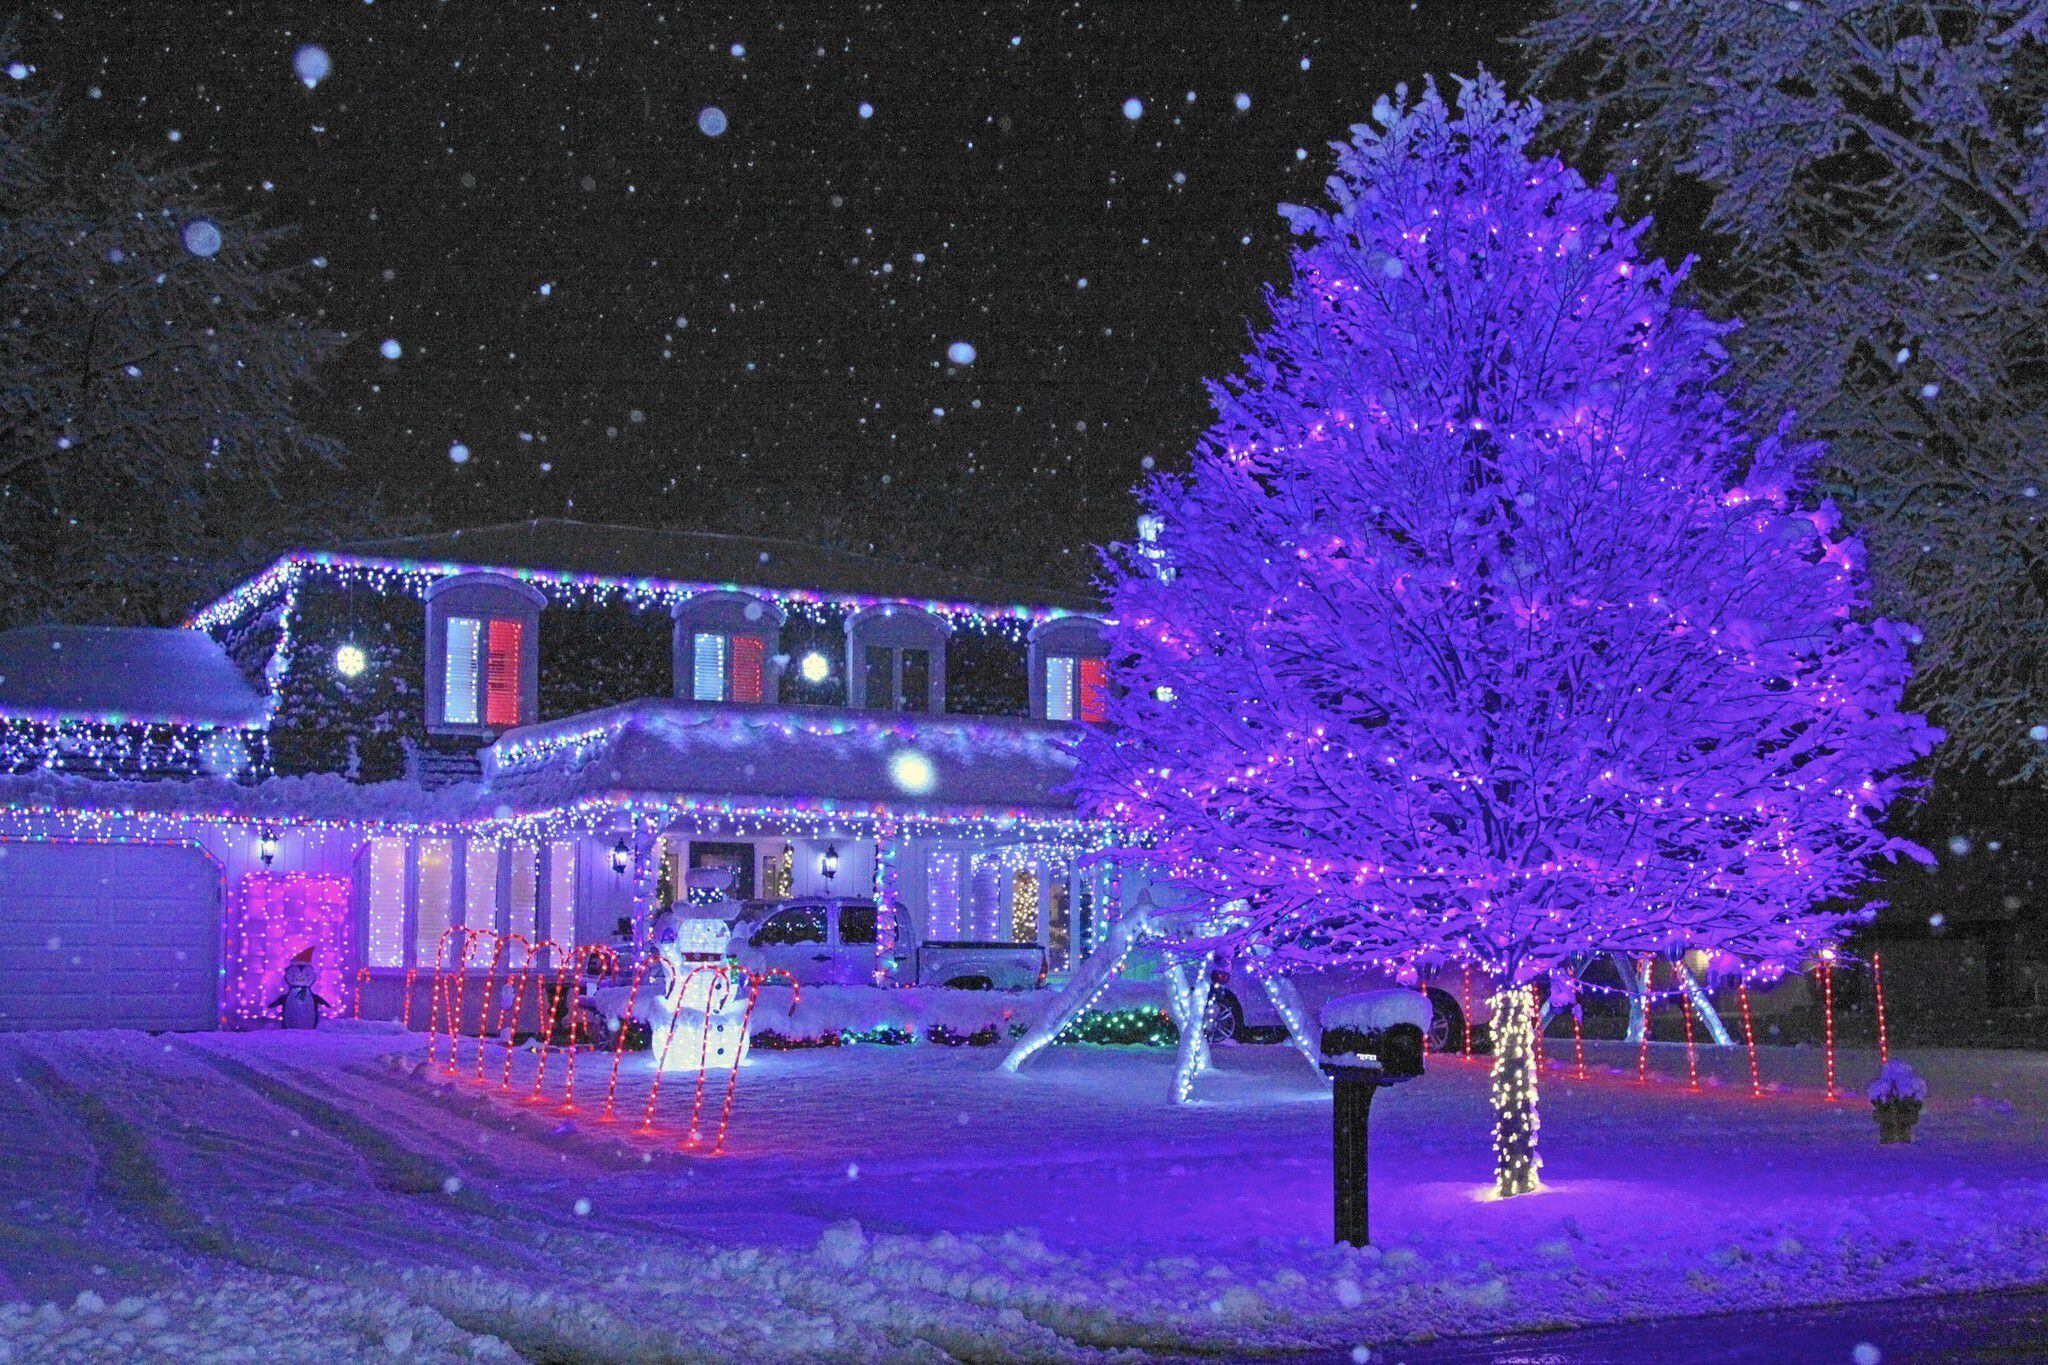 How Early Should I Book Christmas Light Services in Naperville?